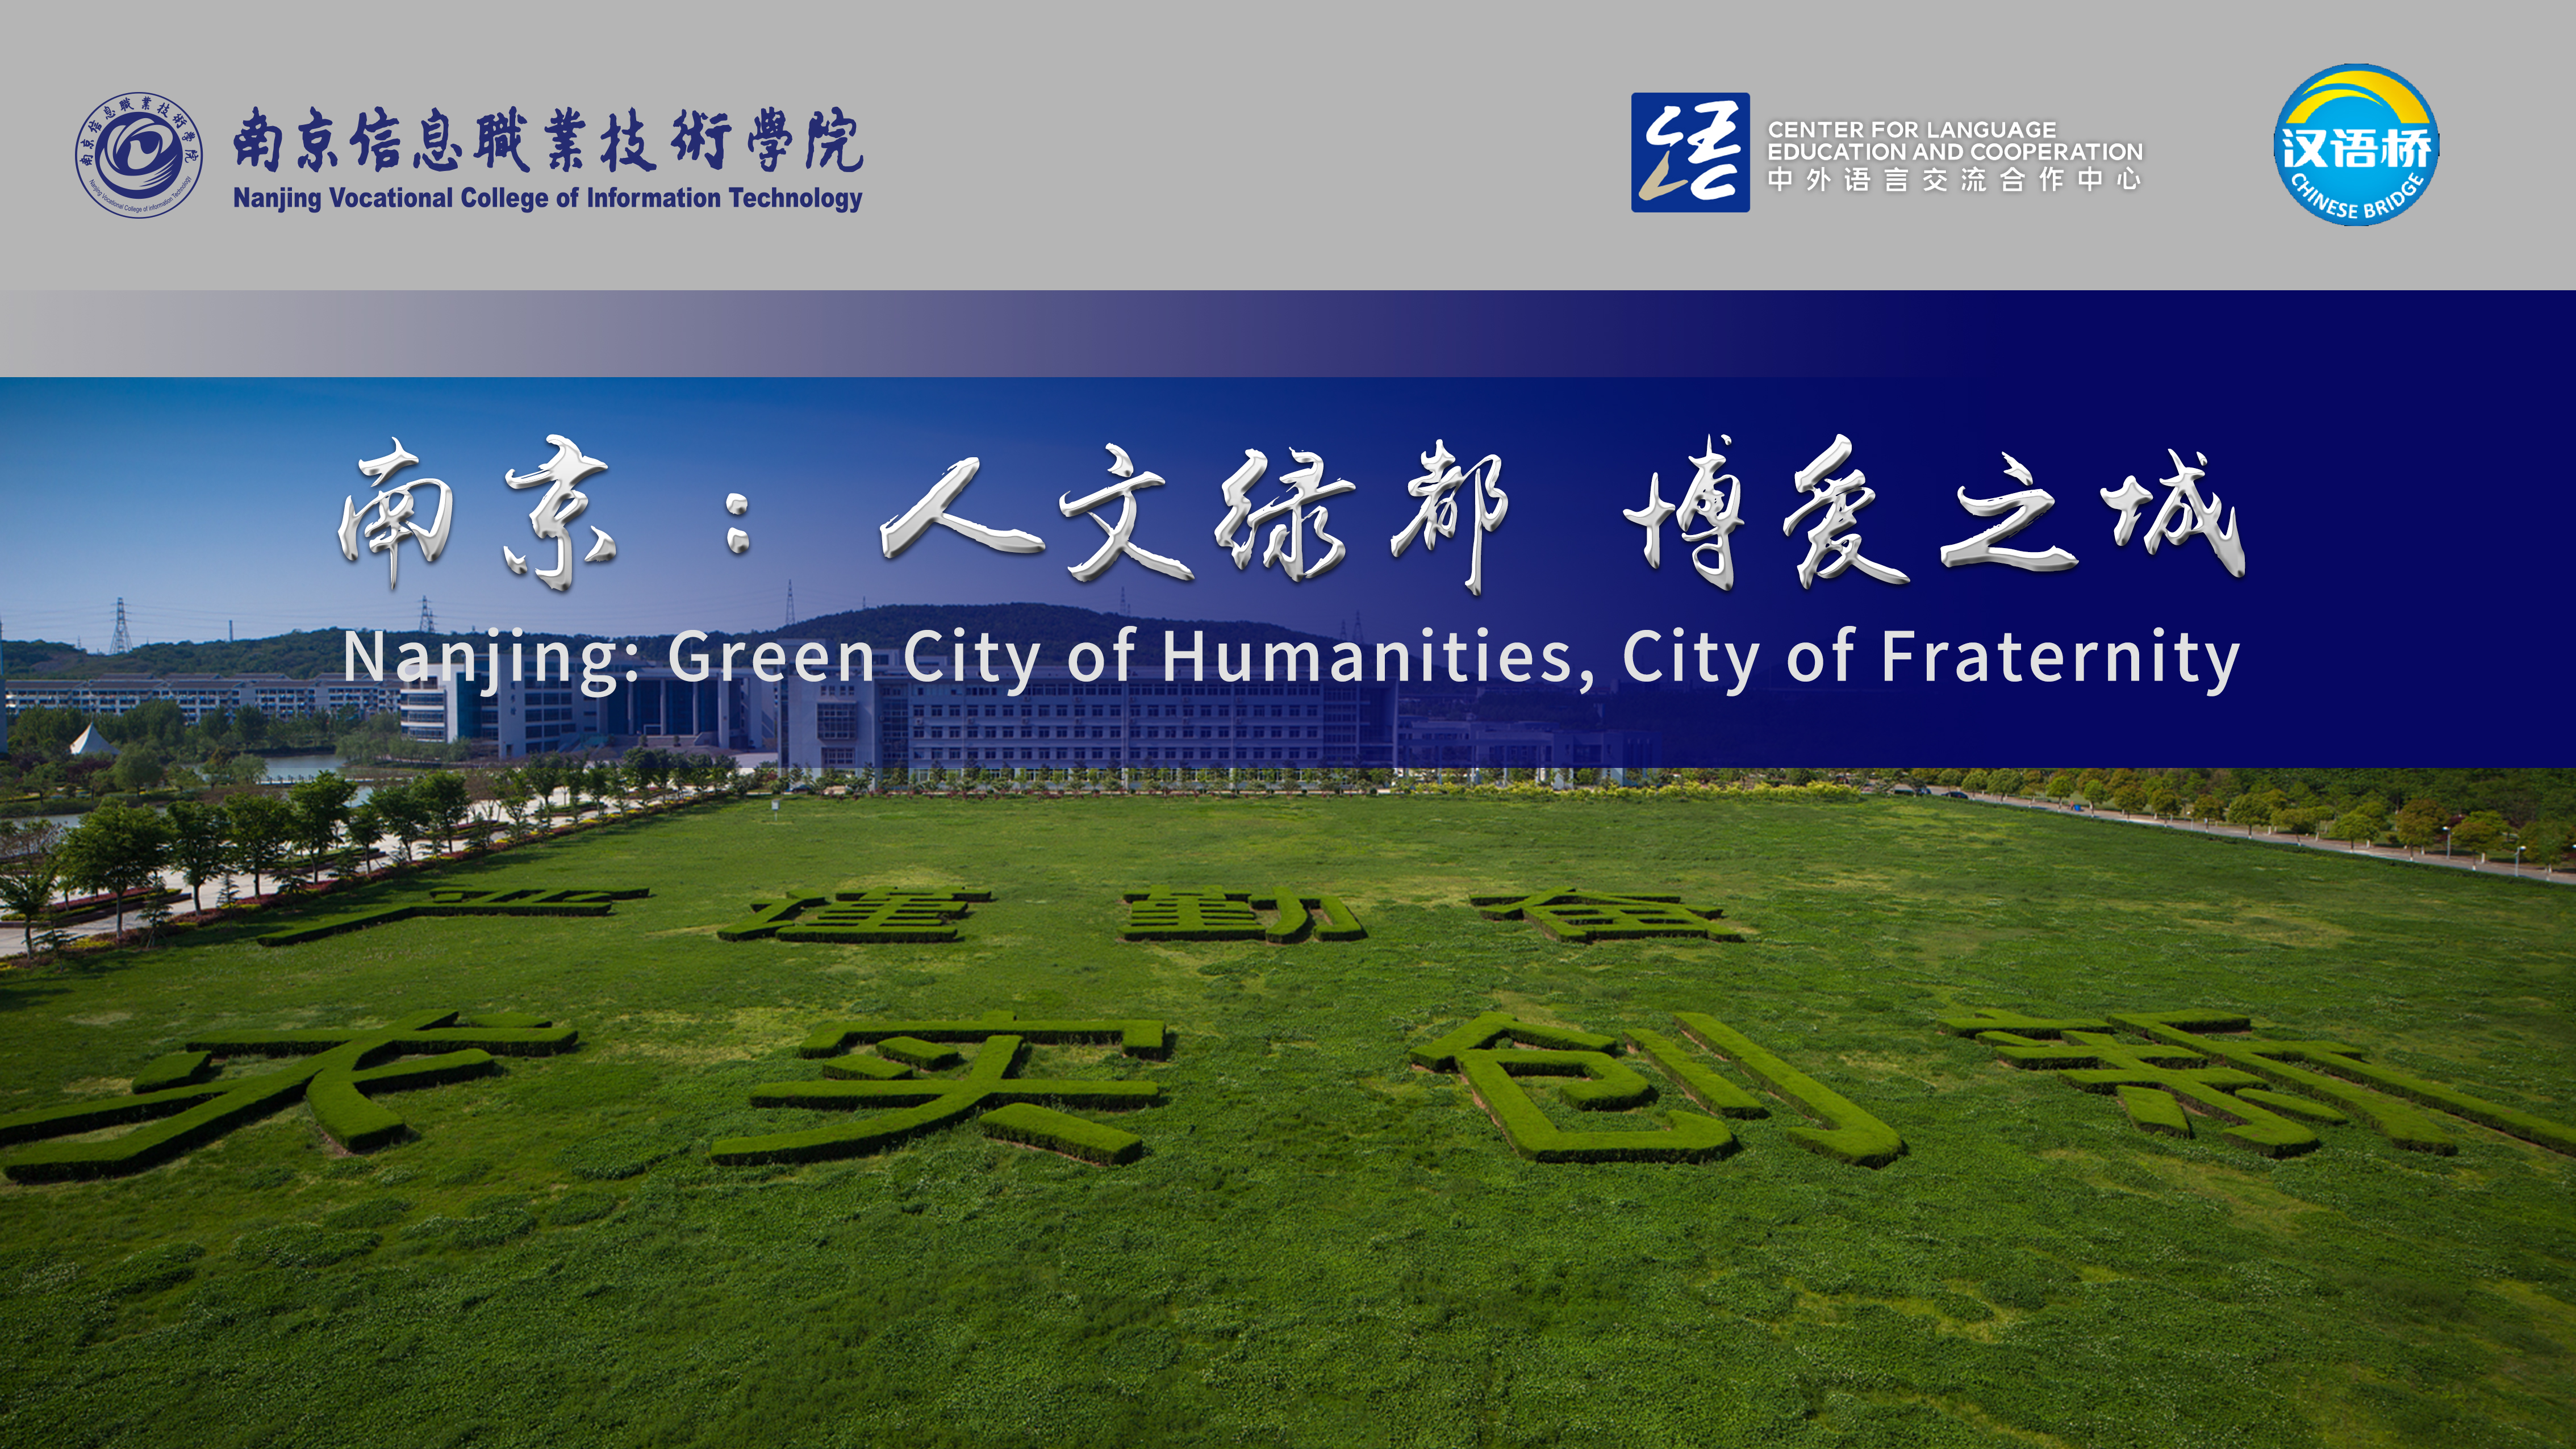 Nanjing: Green City of Humanities, City of Fraternity